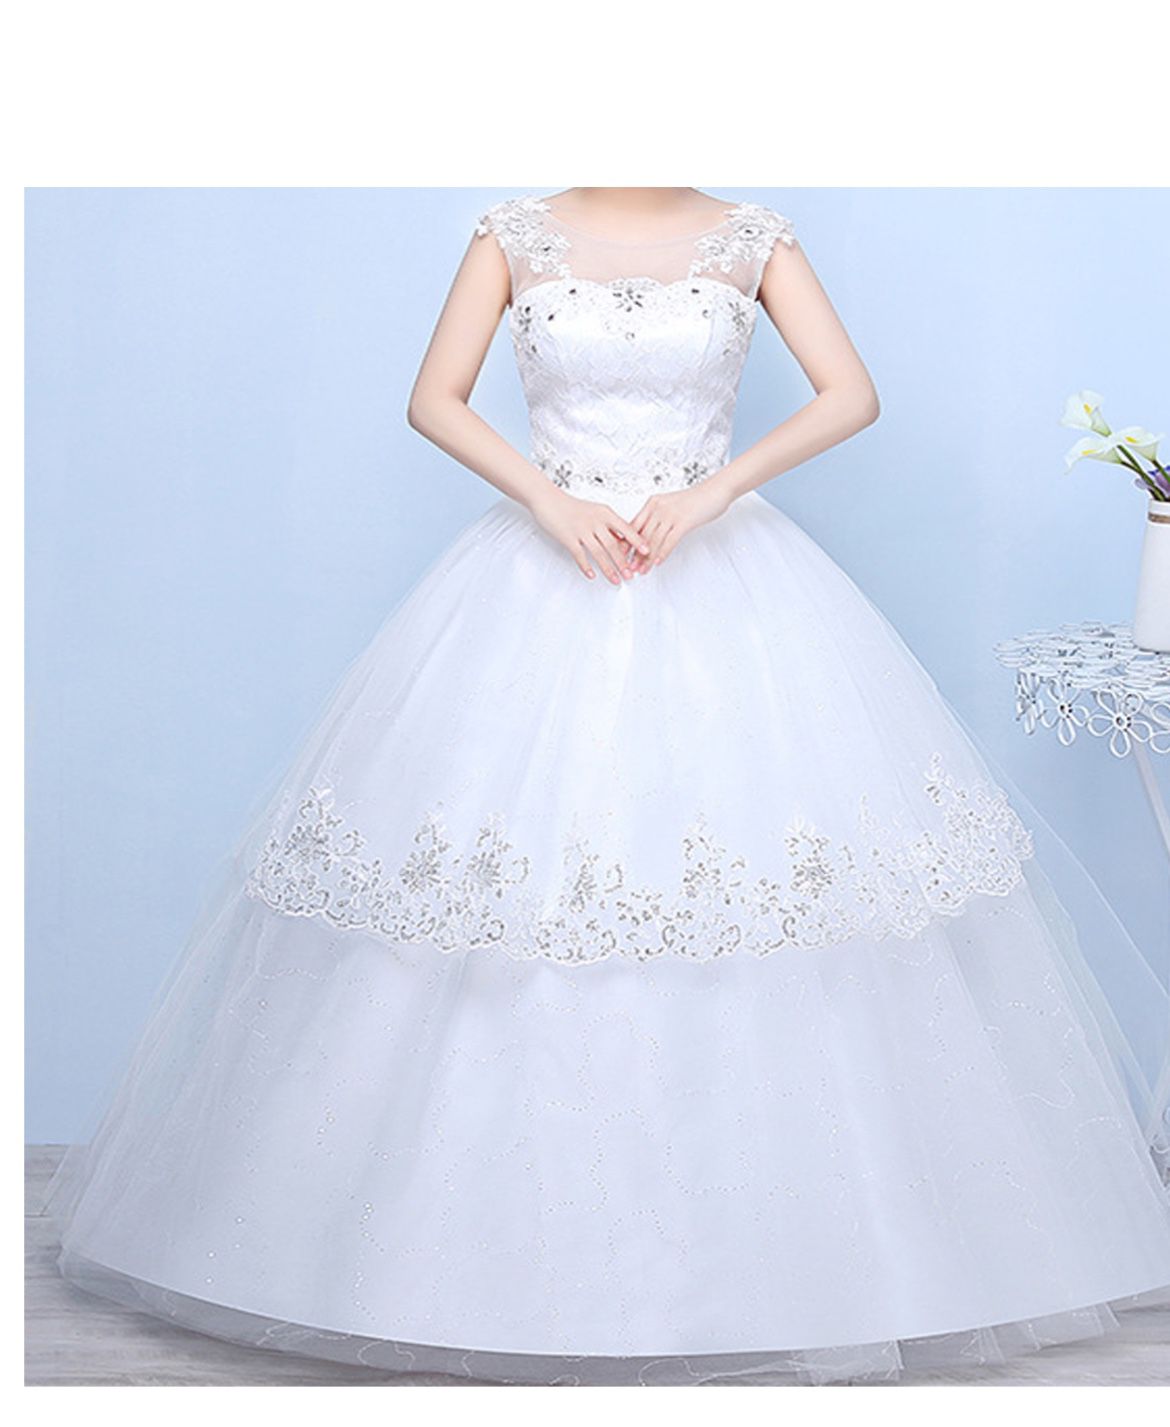  Gown Wedding Dress. Fit : Women's Color : White